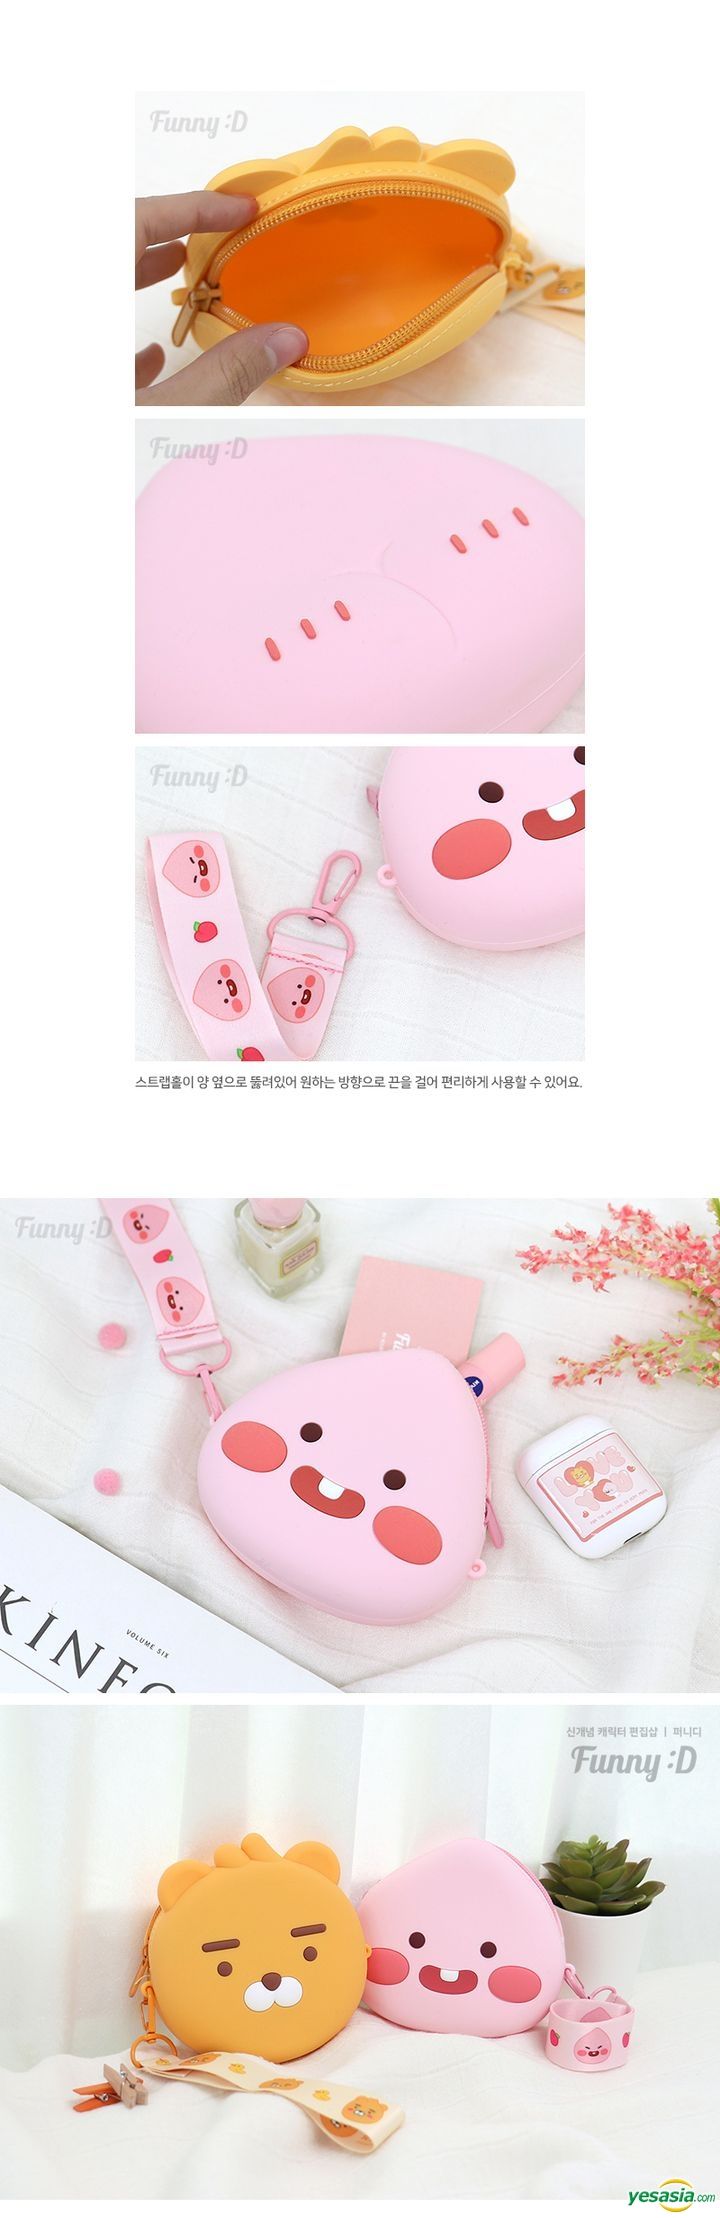 Yesasia Image Gallery Kakao Friends Little Silicon Face Pouch Apeach 5740